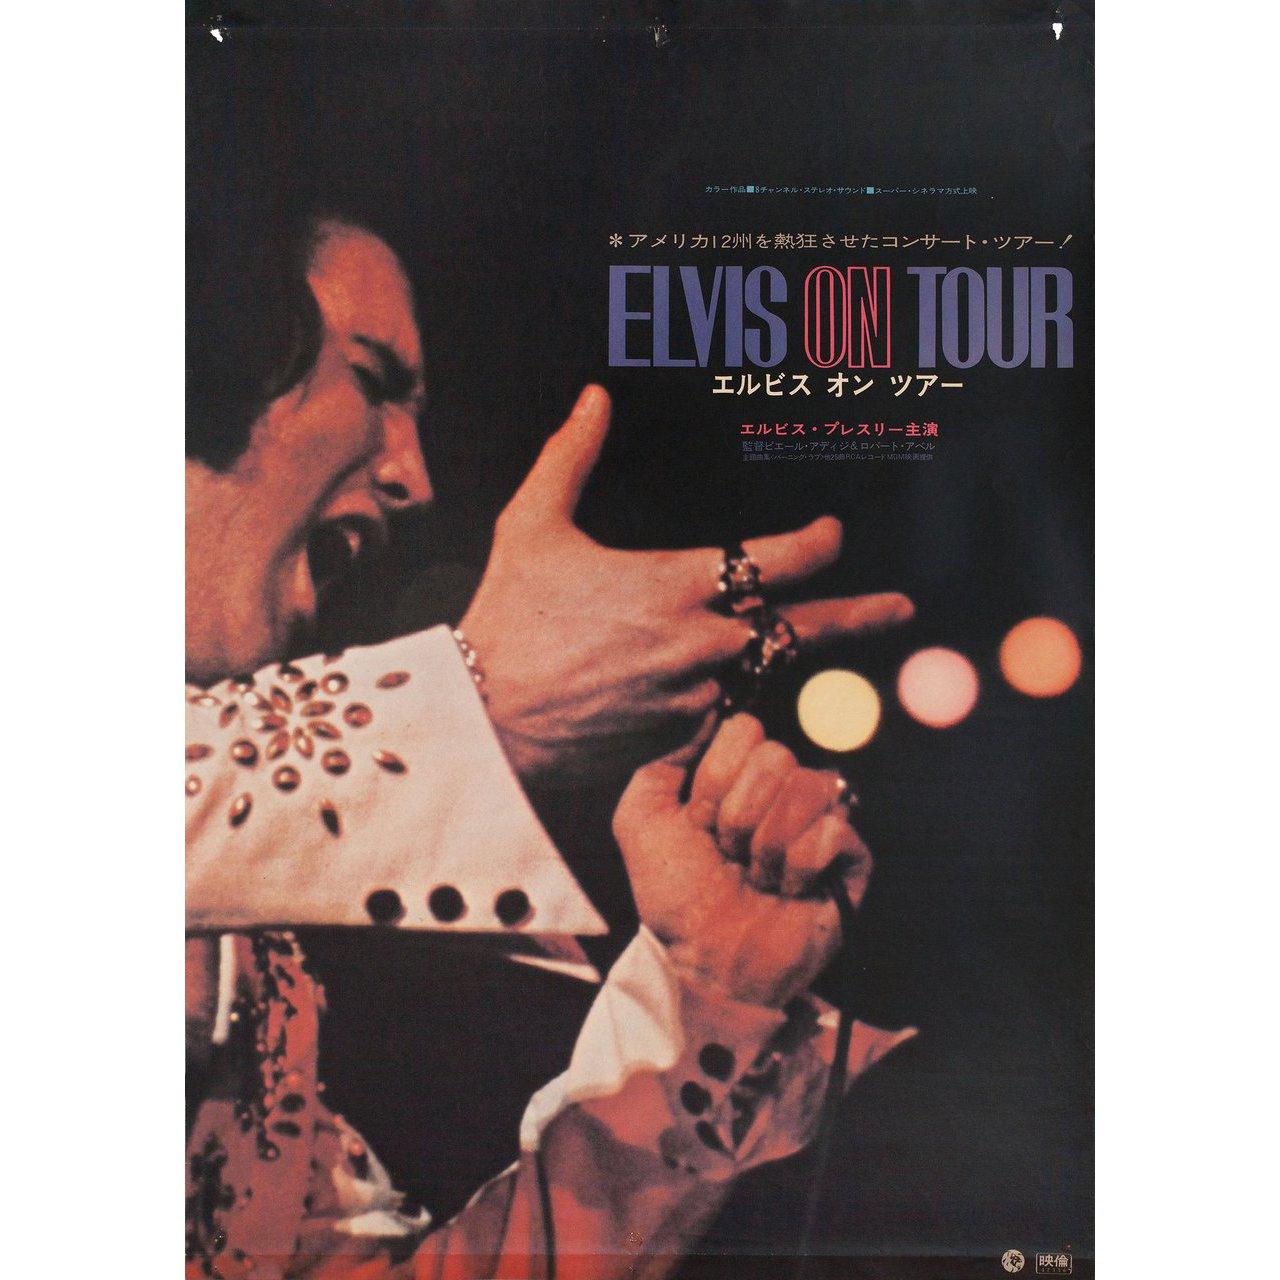 Original 1972 Japanese B2 poster for the documentary film Elvis on Tour directed by Robert Abel / Pierre Adidge with Elvis Presley / Bill Baize / Estell Brown / James Burton. Very good condition, folded with pinholes in corners. Many original